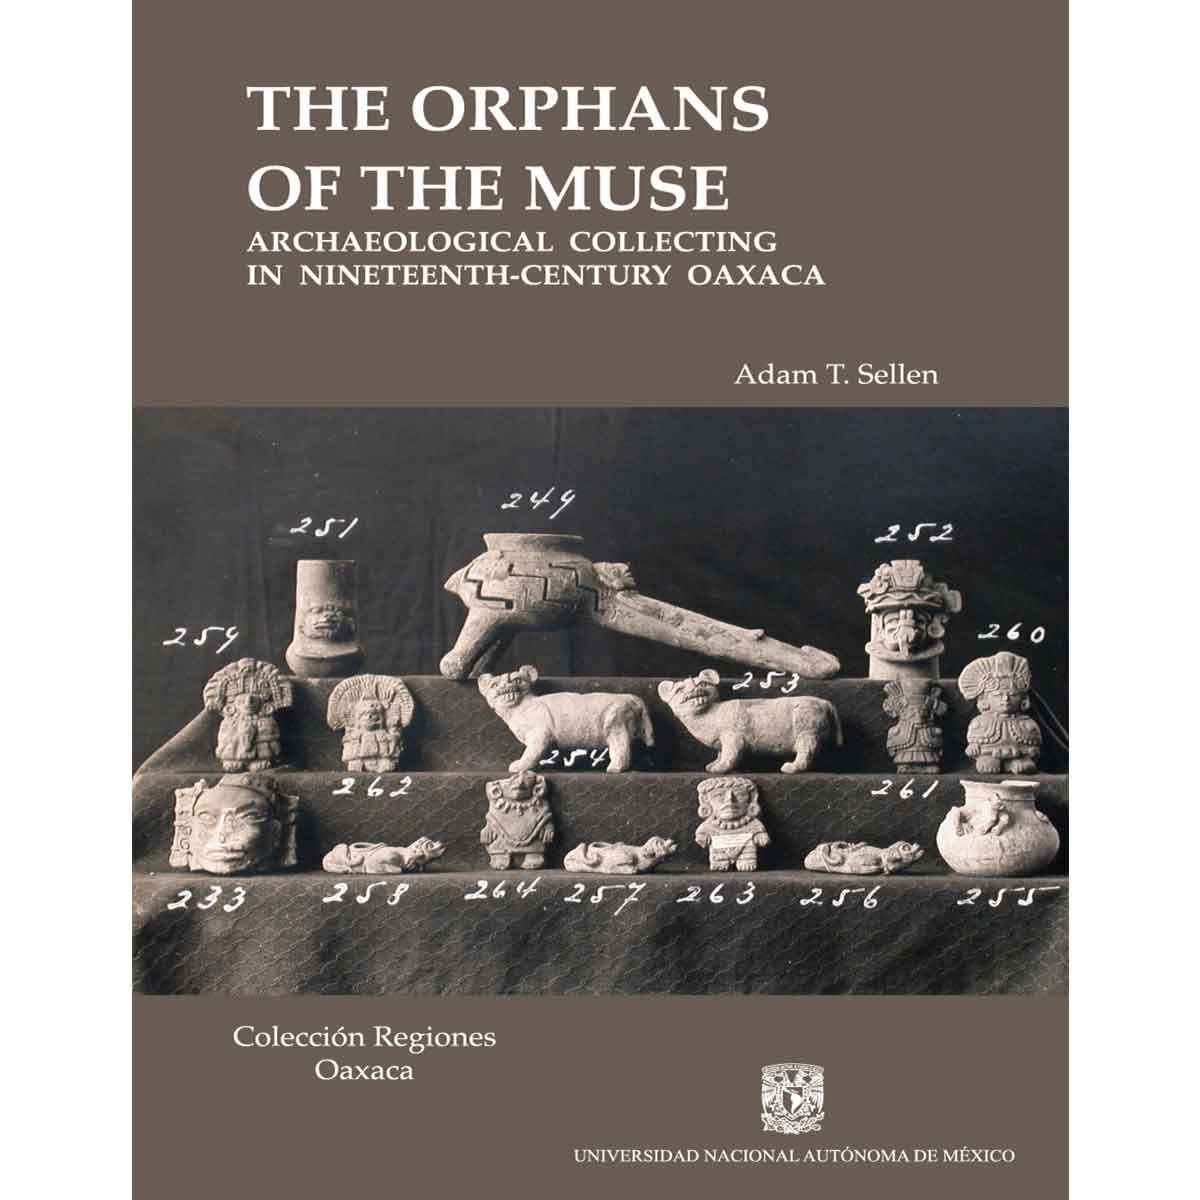 THE ORPHANS OF THE MUSE. ARCHAEOLOGICAL COLLECTING IN NINETEENTH-CENTURY OAXACA